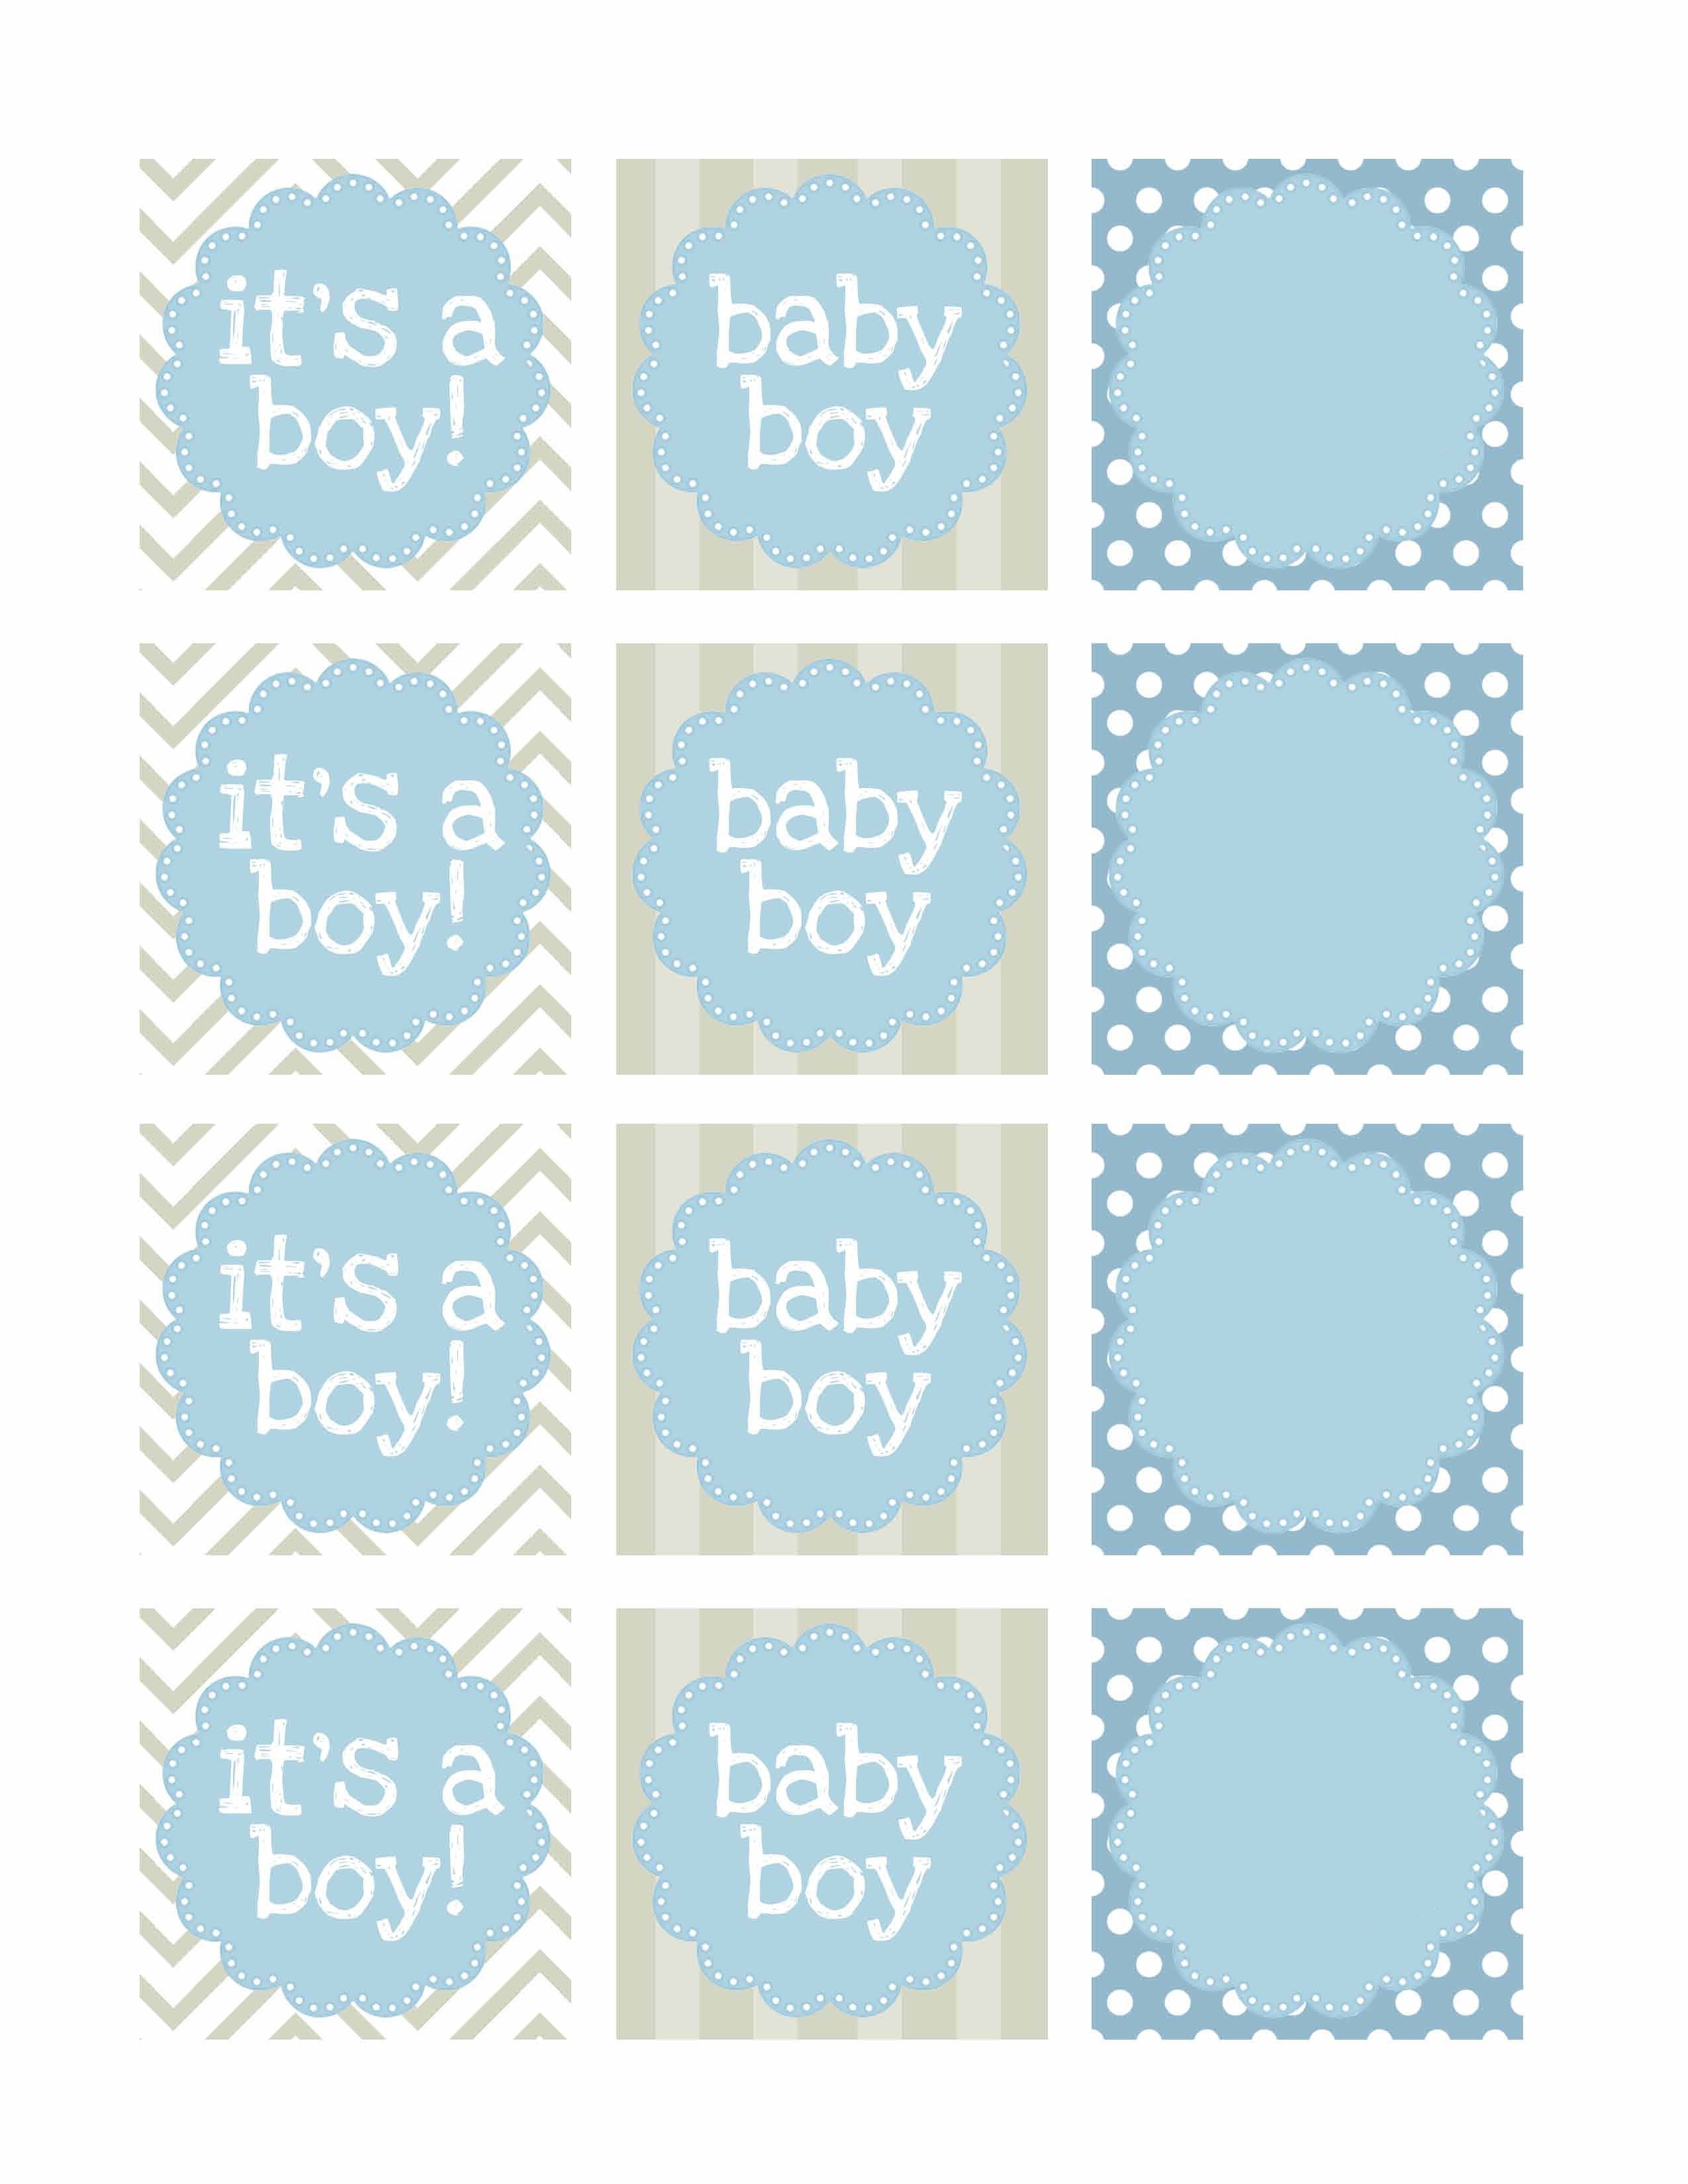 Boy Baby Shower Free Printables | Babyshower - Imprimibles Niños - Free Printable Baby Shower Labels And Tags